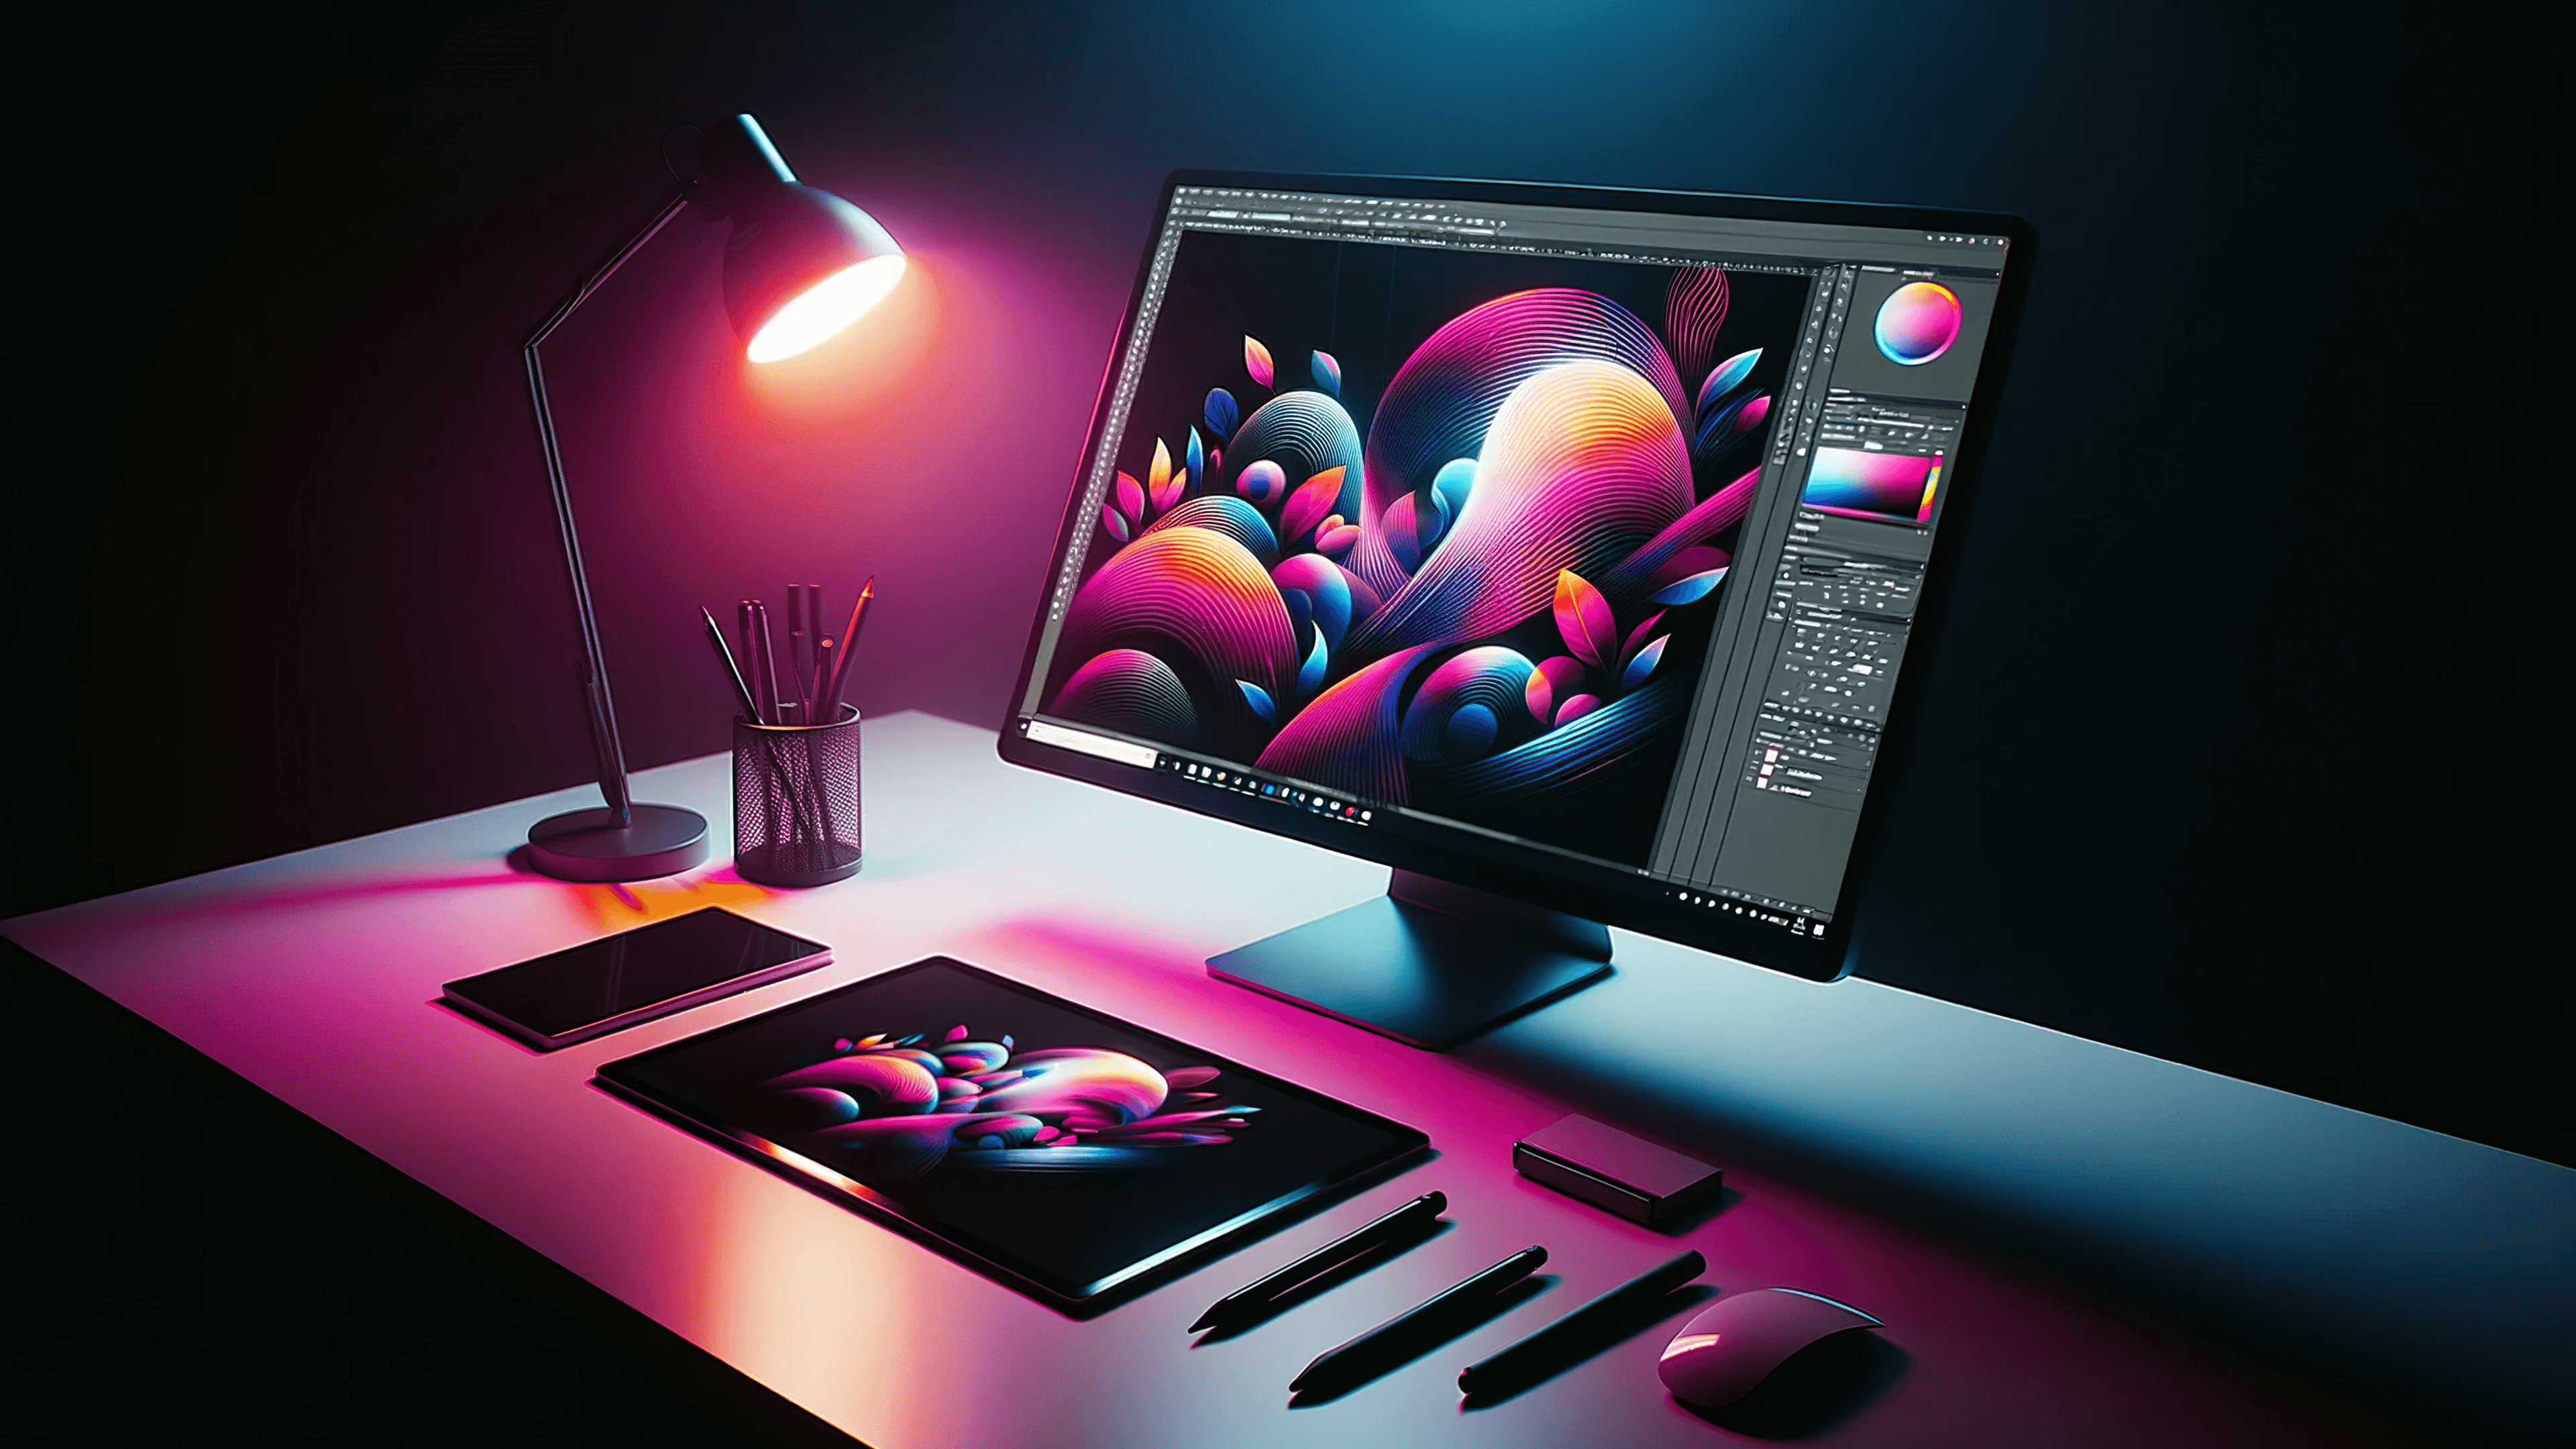 A desk with a monitor, a graphical tablet and a lamp on. Some graphical elements in vivid colours on the screen.